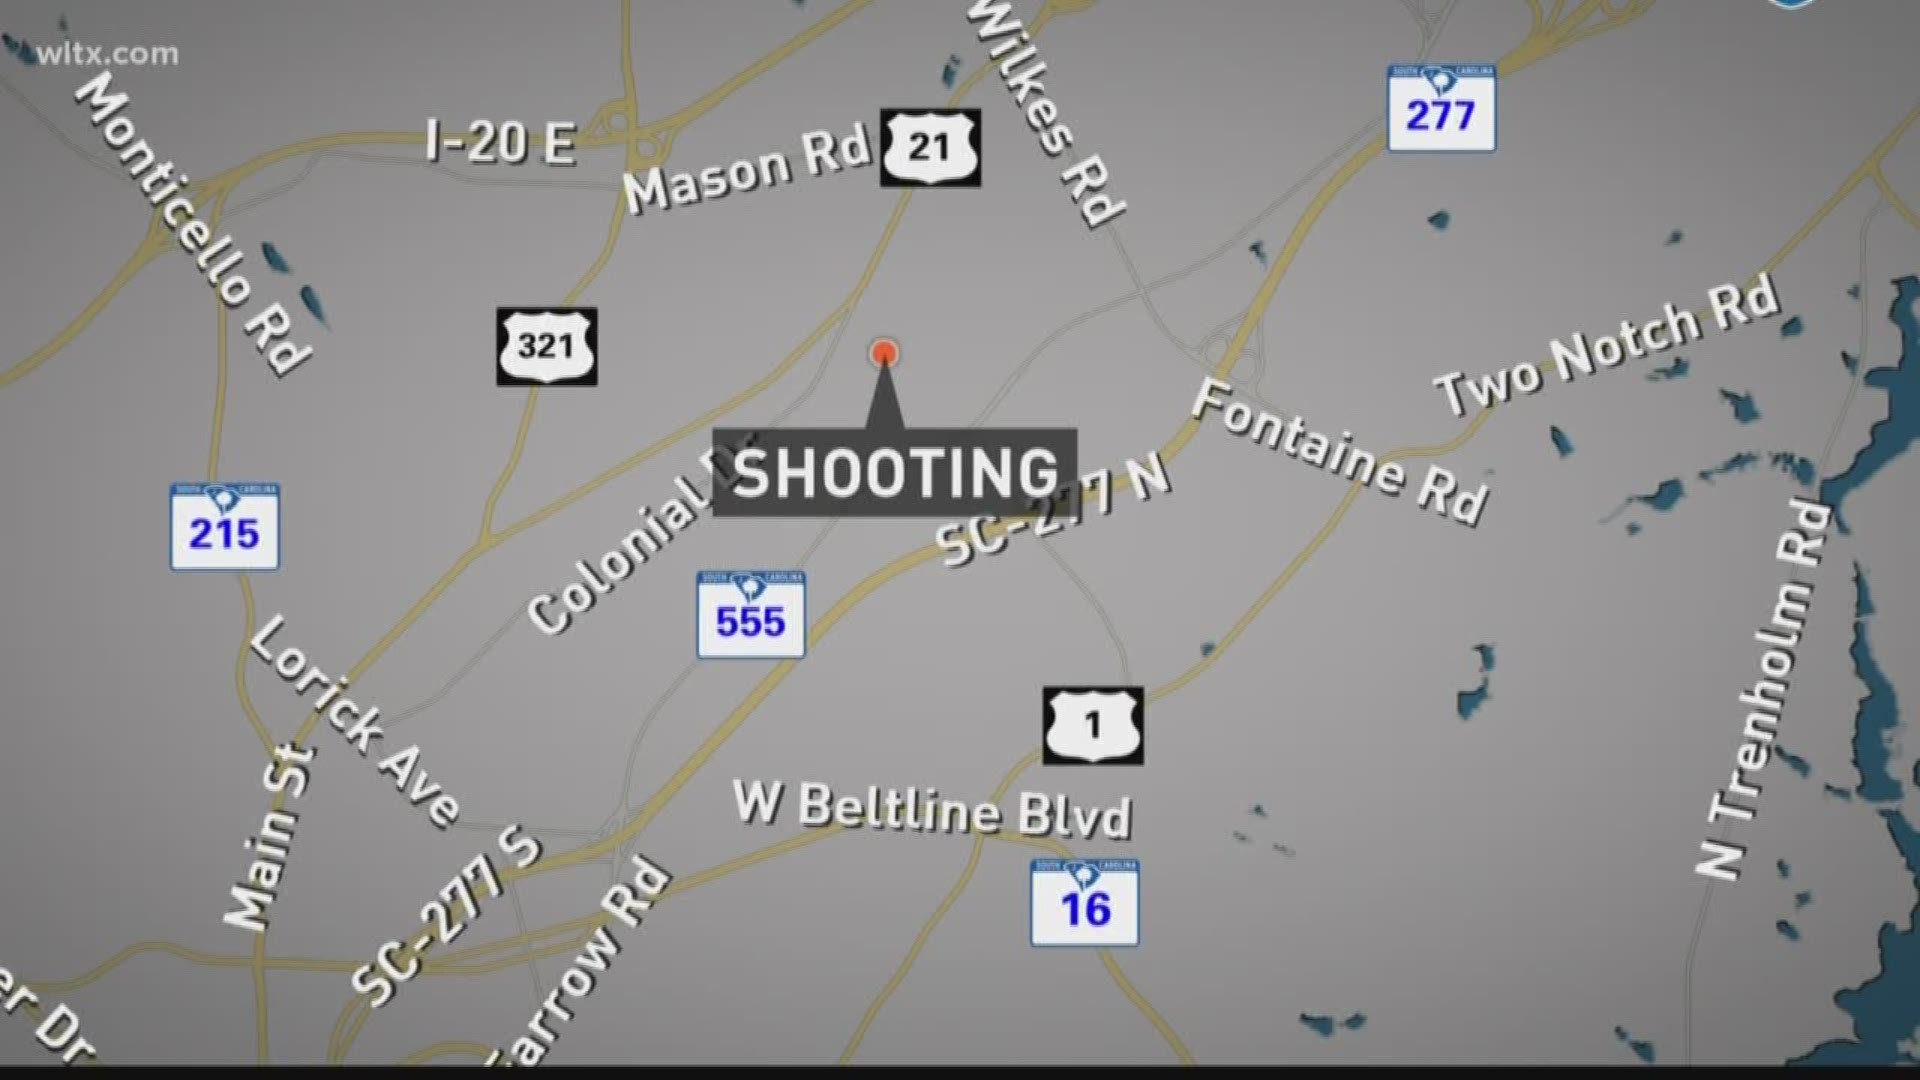 Columbia Police said one person is in the hospital after being shot twice after an argument.